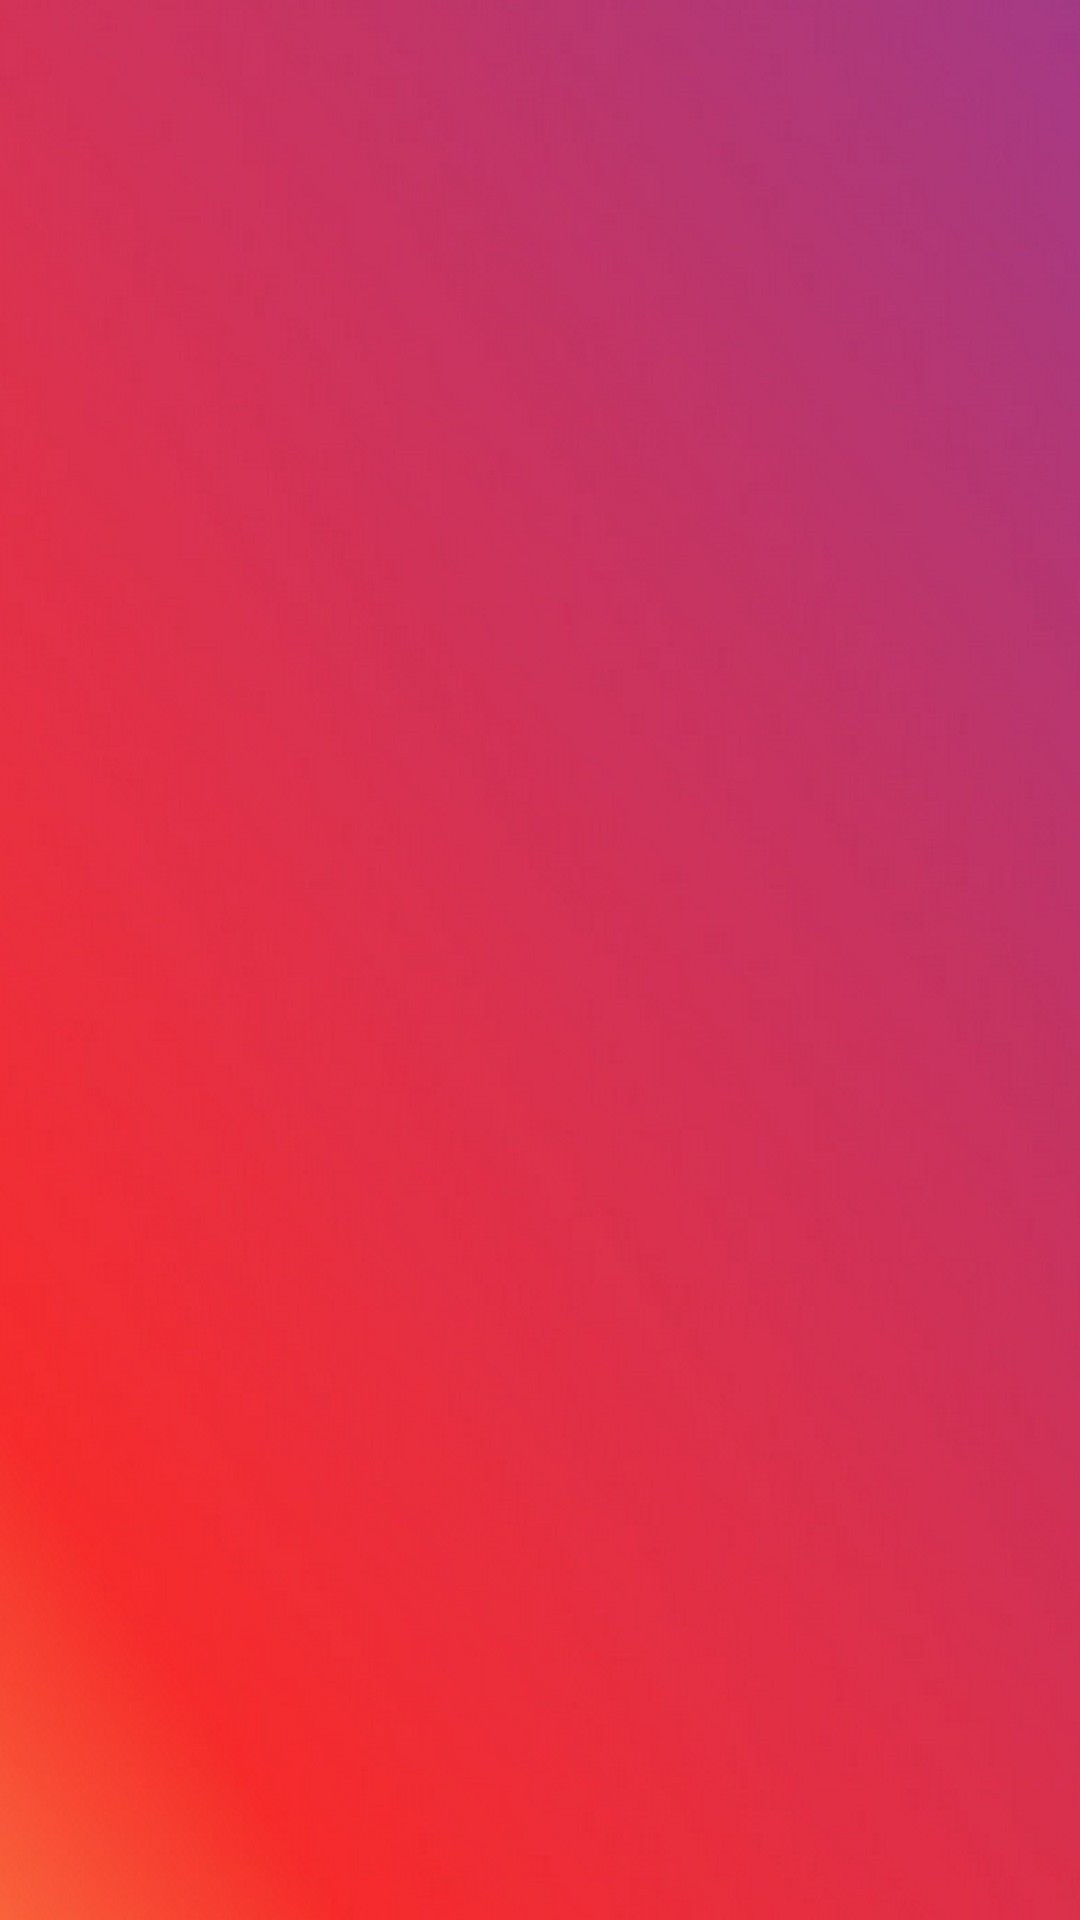 Gradient iPhone X Wallpaper HD with high-resolution 1080x1920 pixel. Download all Mobile Wallpapers and Use them as wallpapers for your iPhone, Tablet, iPad, Android and other mobile devices